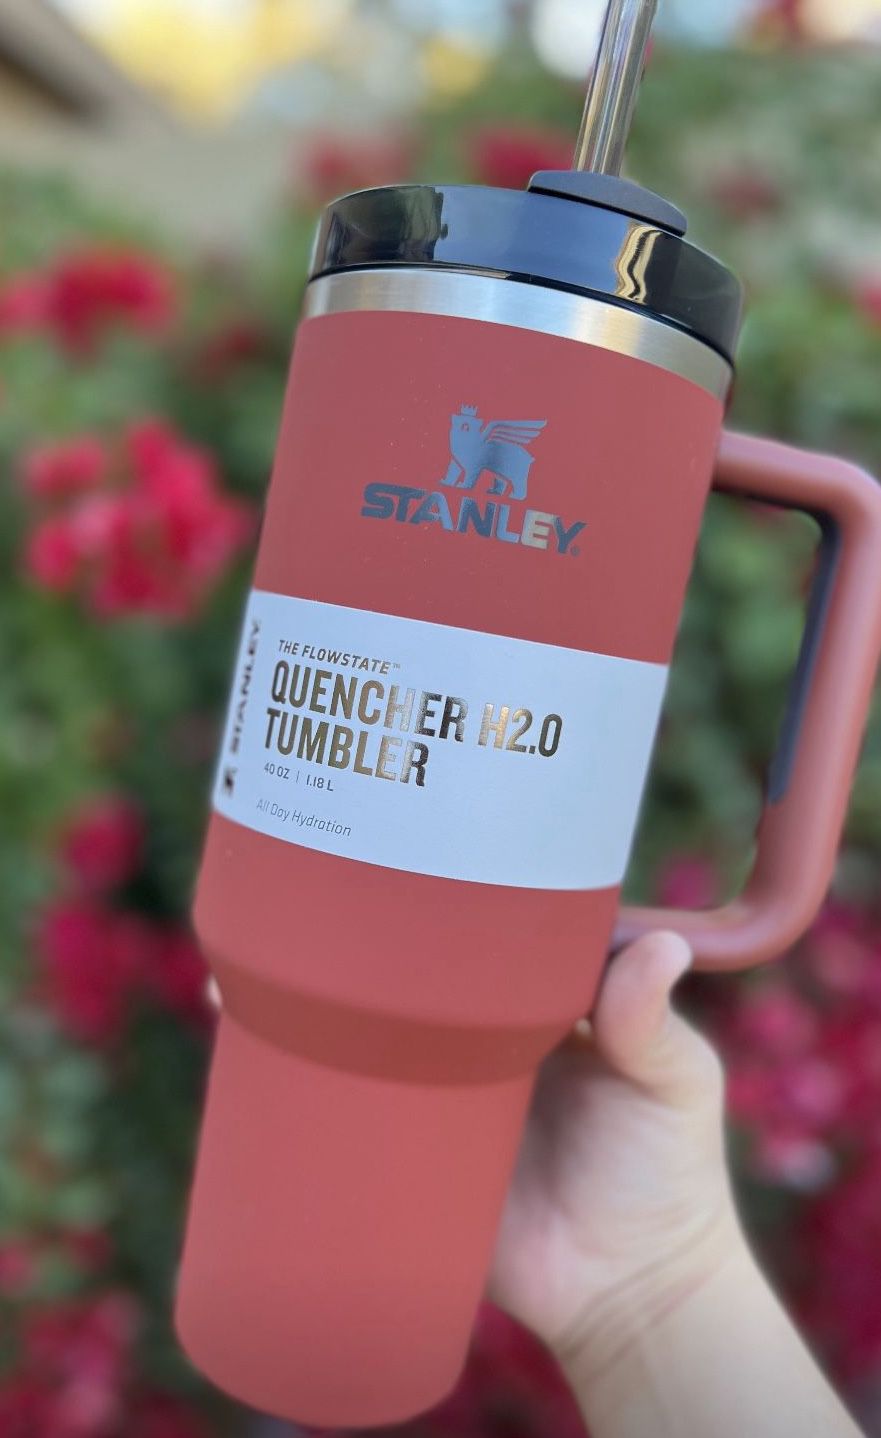 BNWOT Pink Dust Stanley Quencher H2.0 Flowstate Tumbler 40 oz